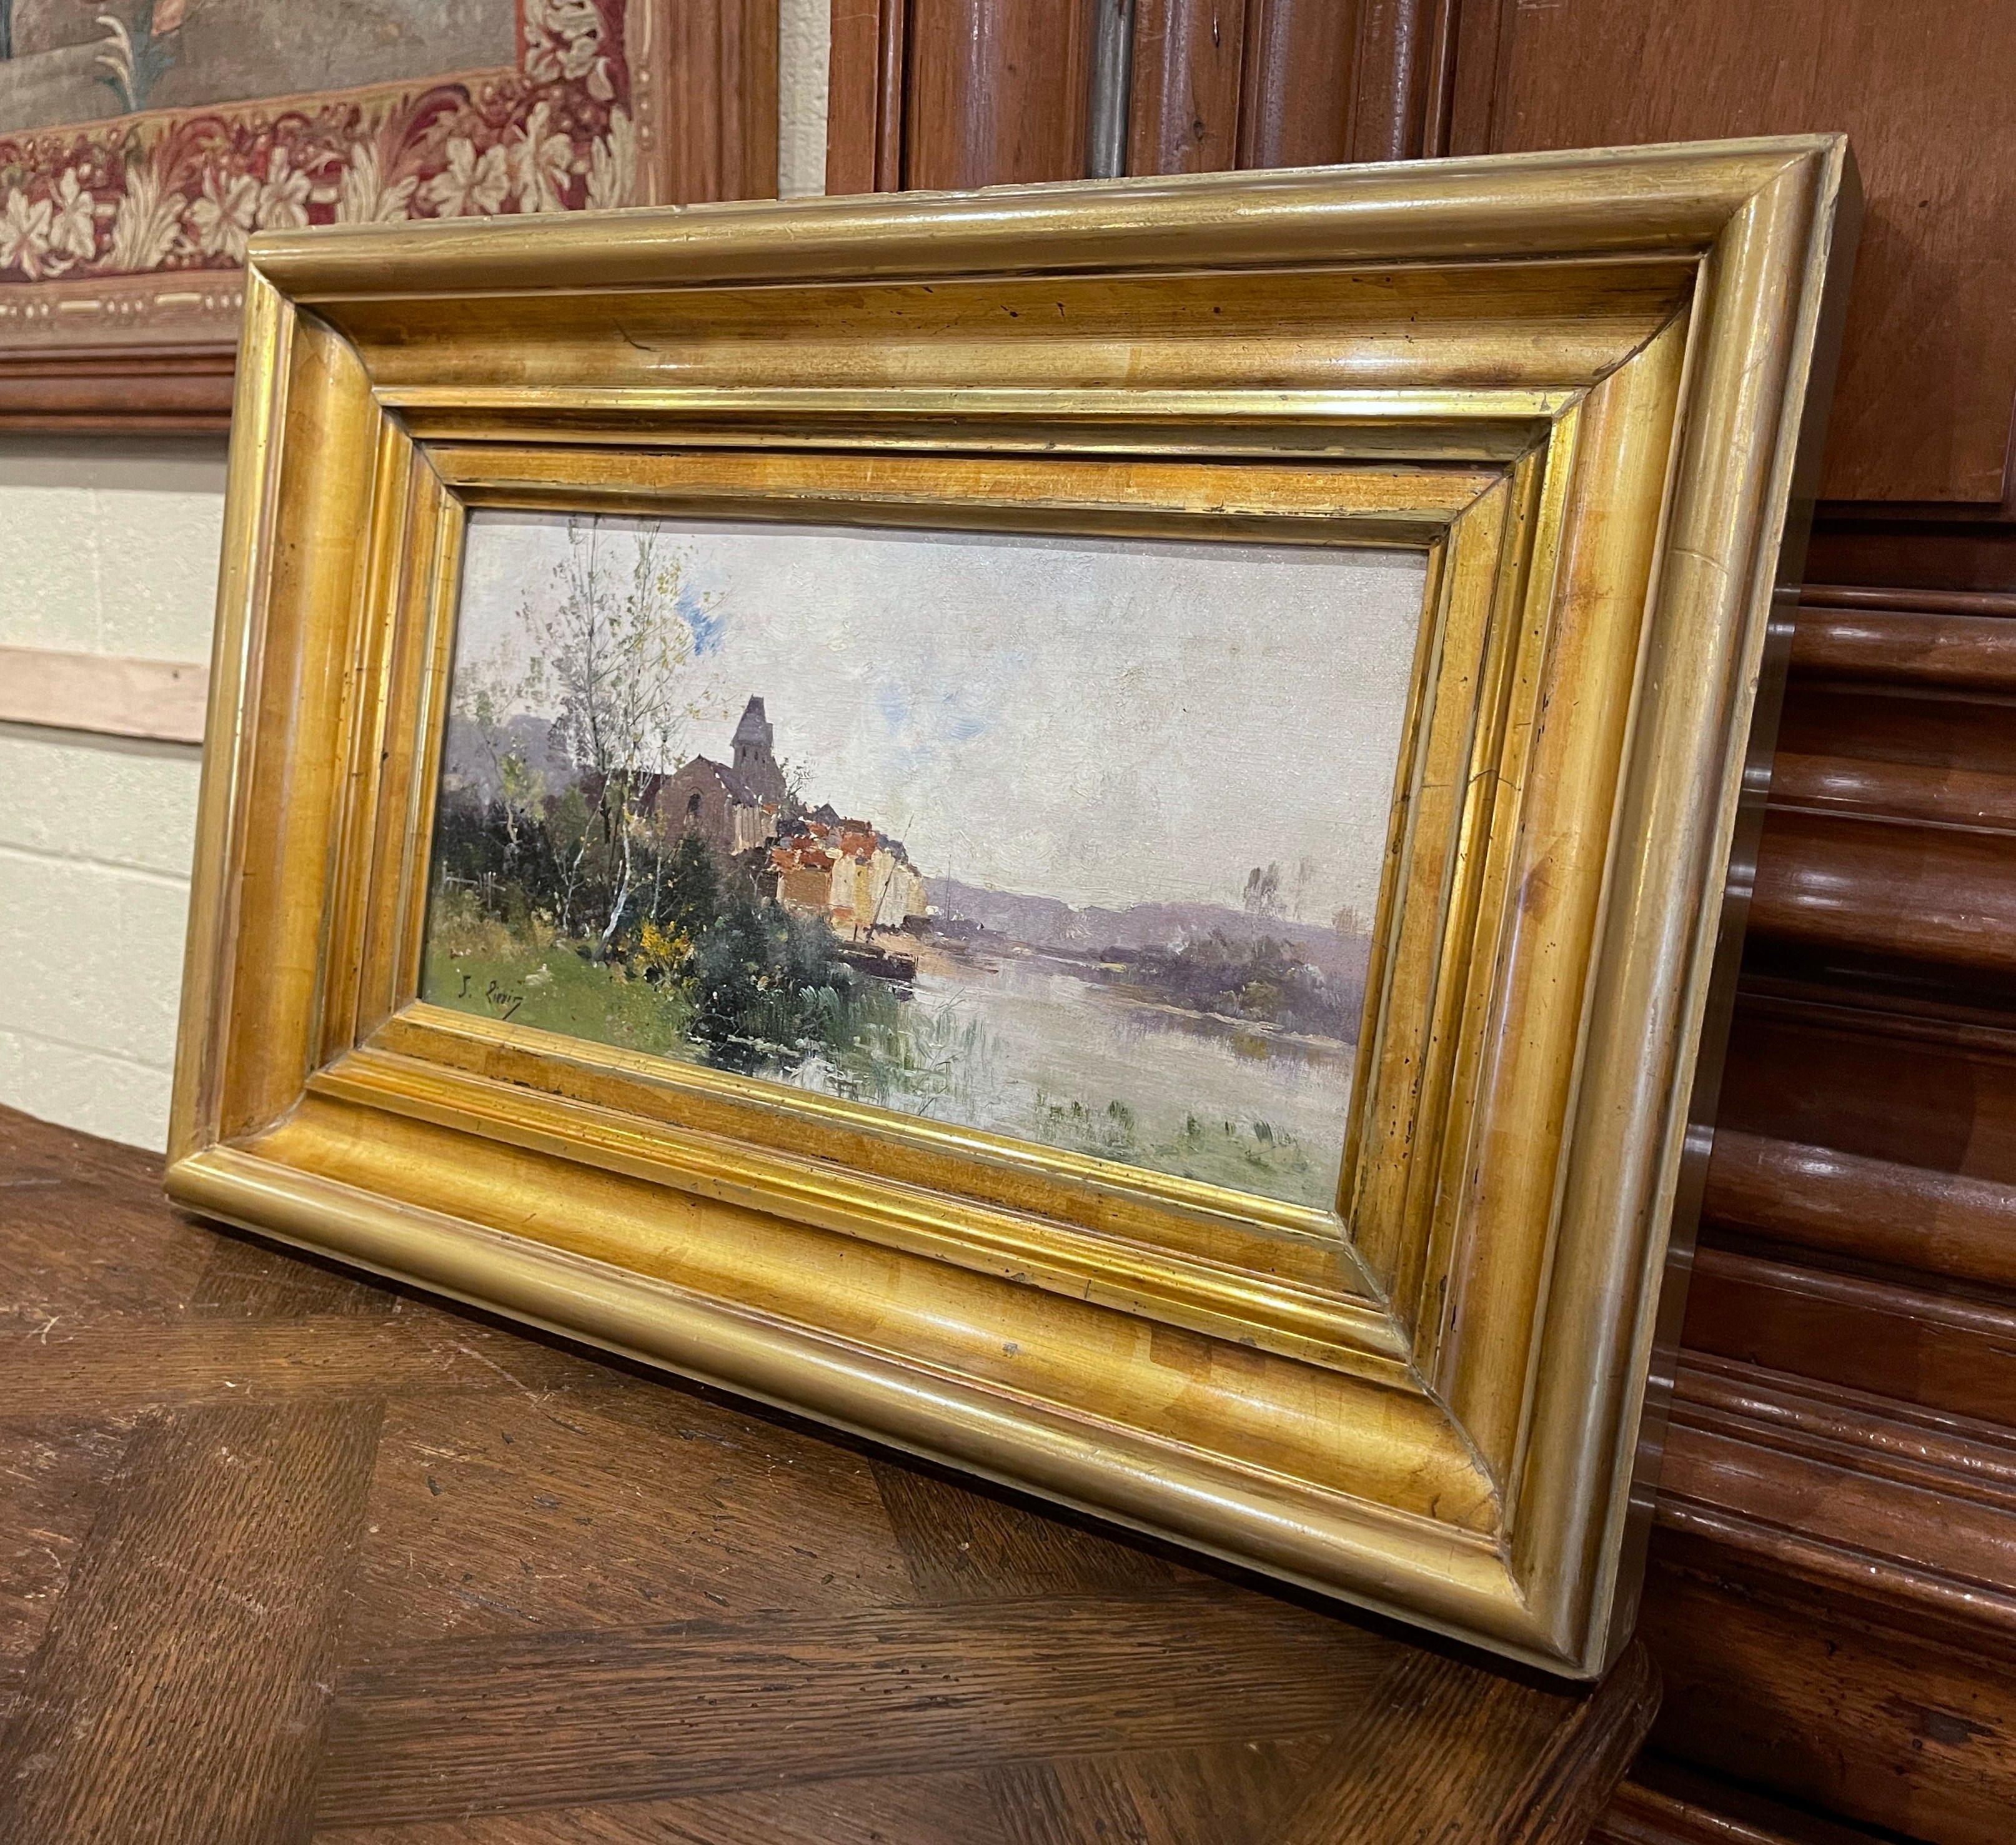 Decorate a study, living room or den with this beautiful and colorful antique landscape painting! Painted in France circa 1890, the artwork painted on canvas is set in a carved gilt wood frame and illustrates a picturesque, countryside scene in